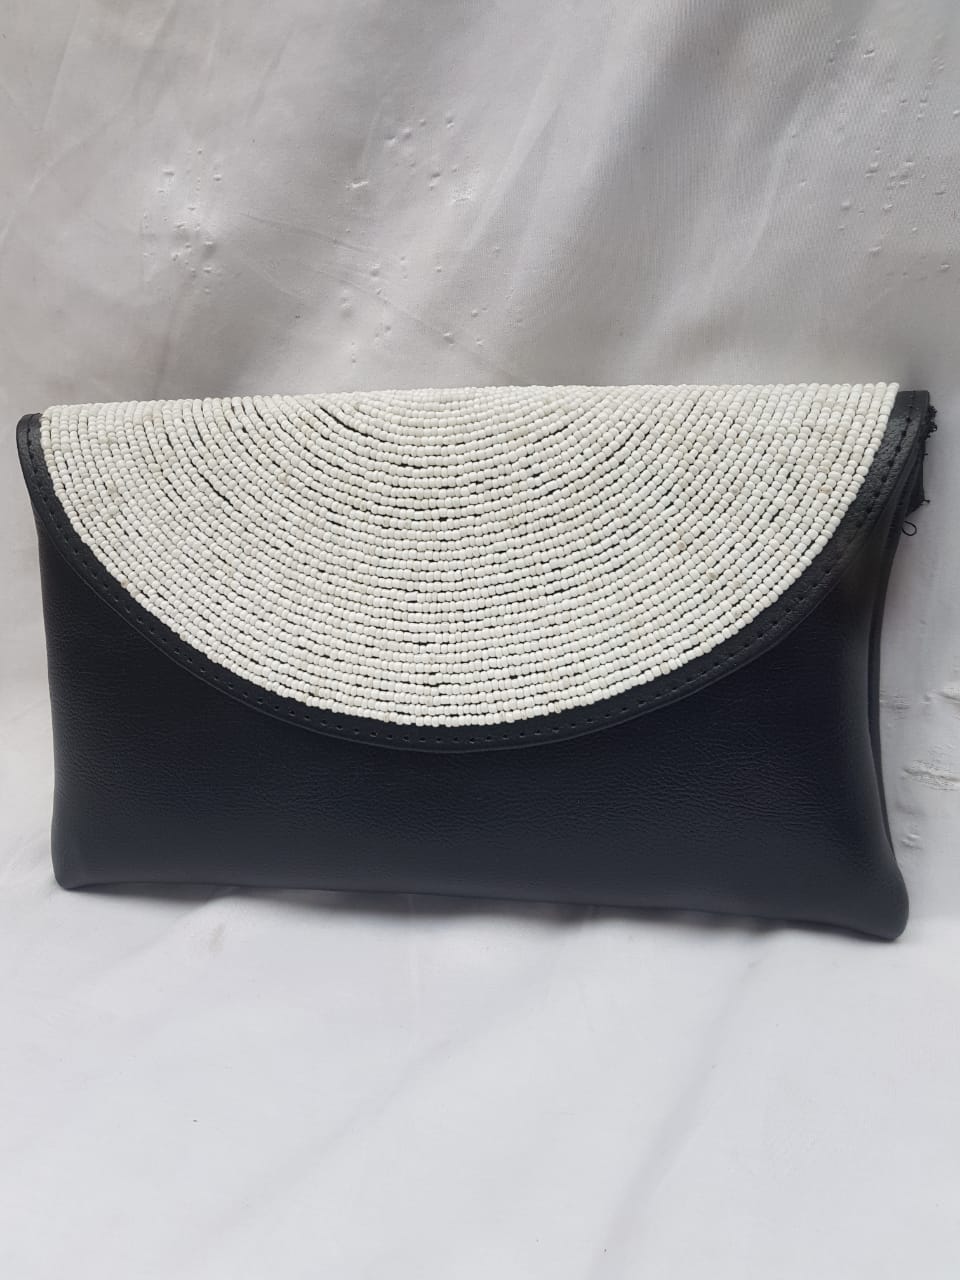 Leather clutch purse decorated with white beads